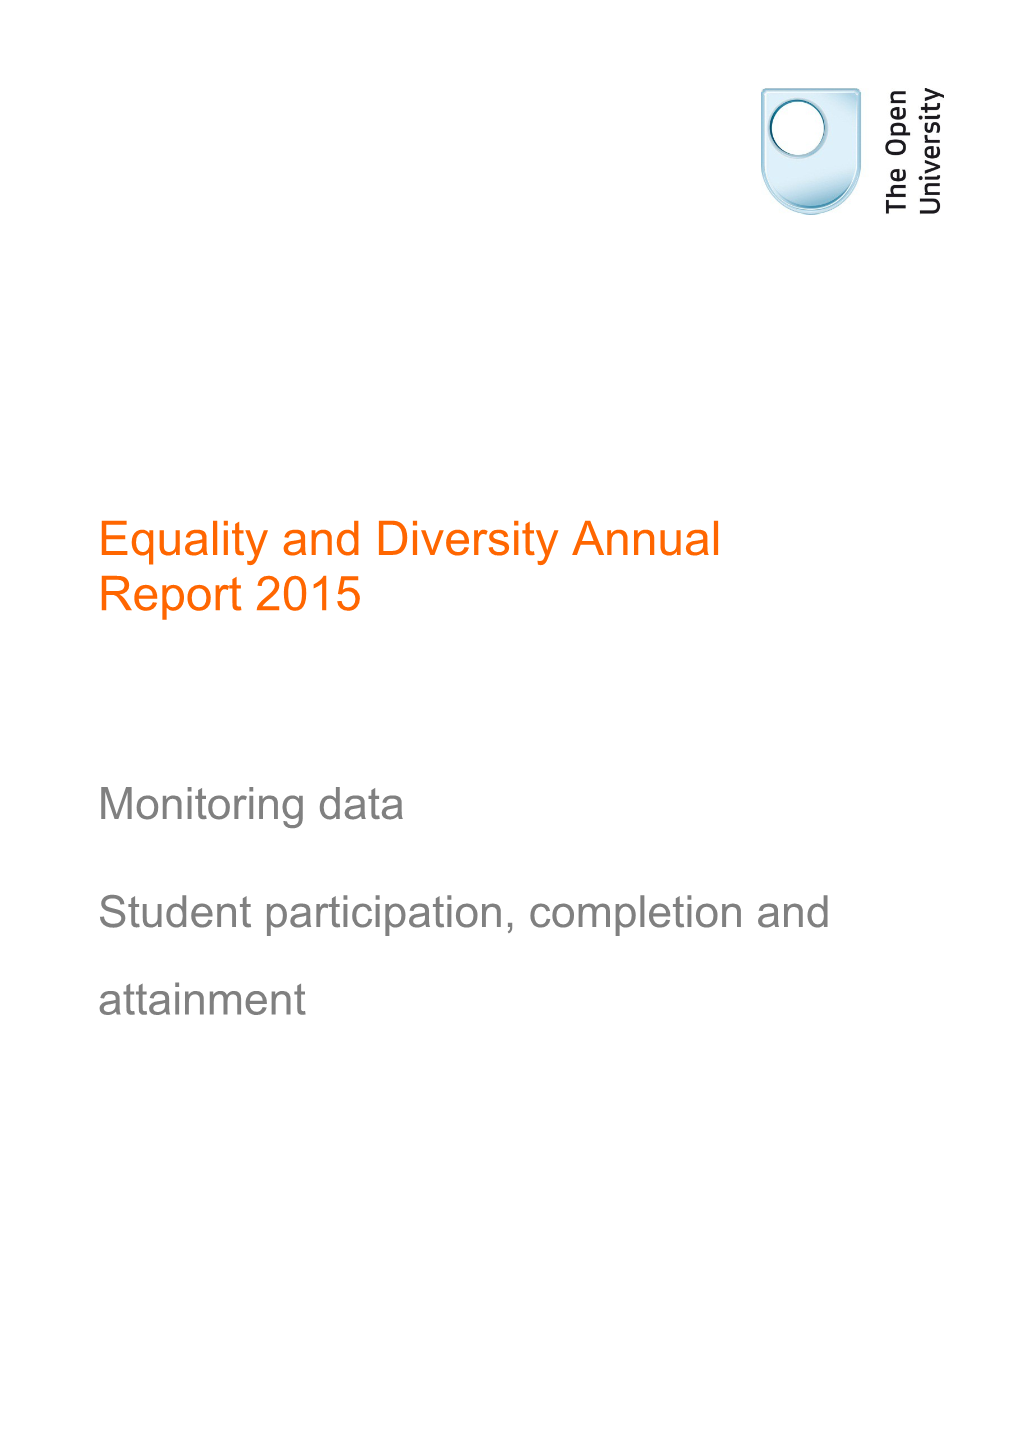 Equality and Diversity Annual Report 2010